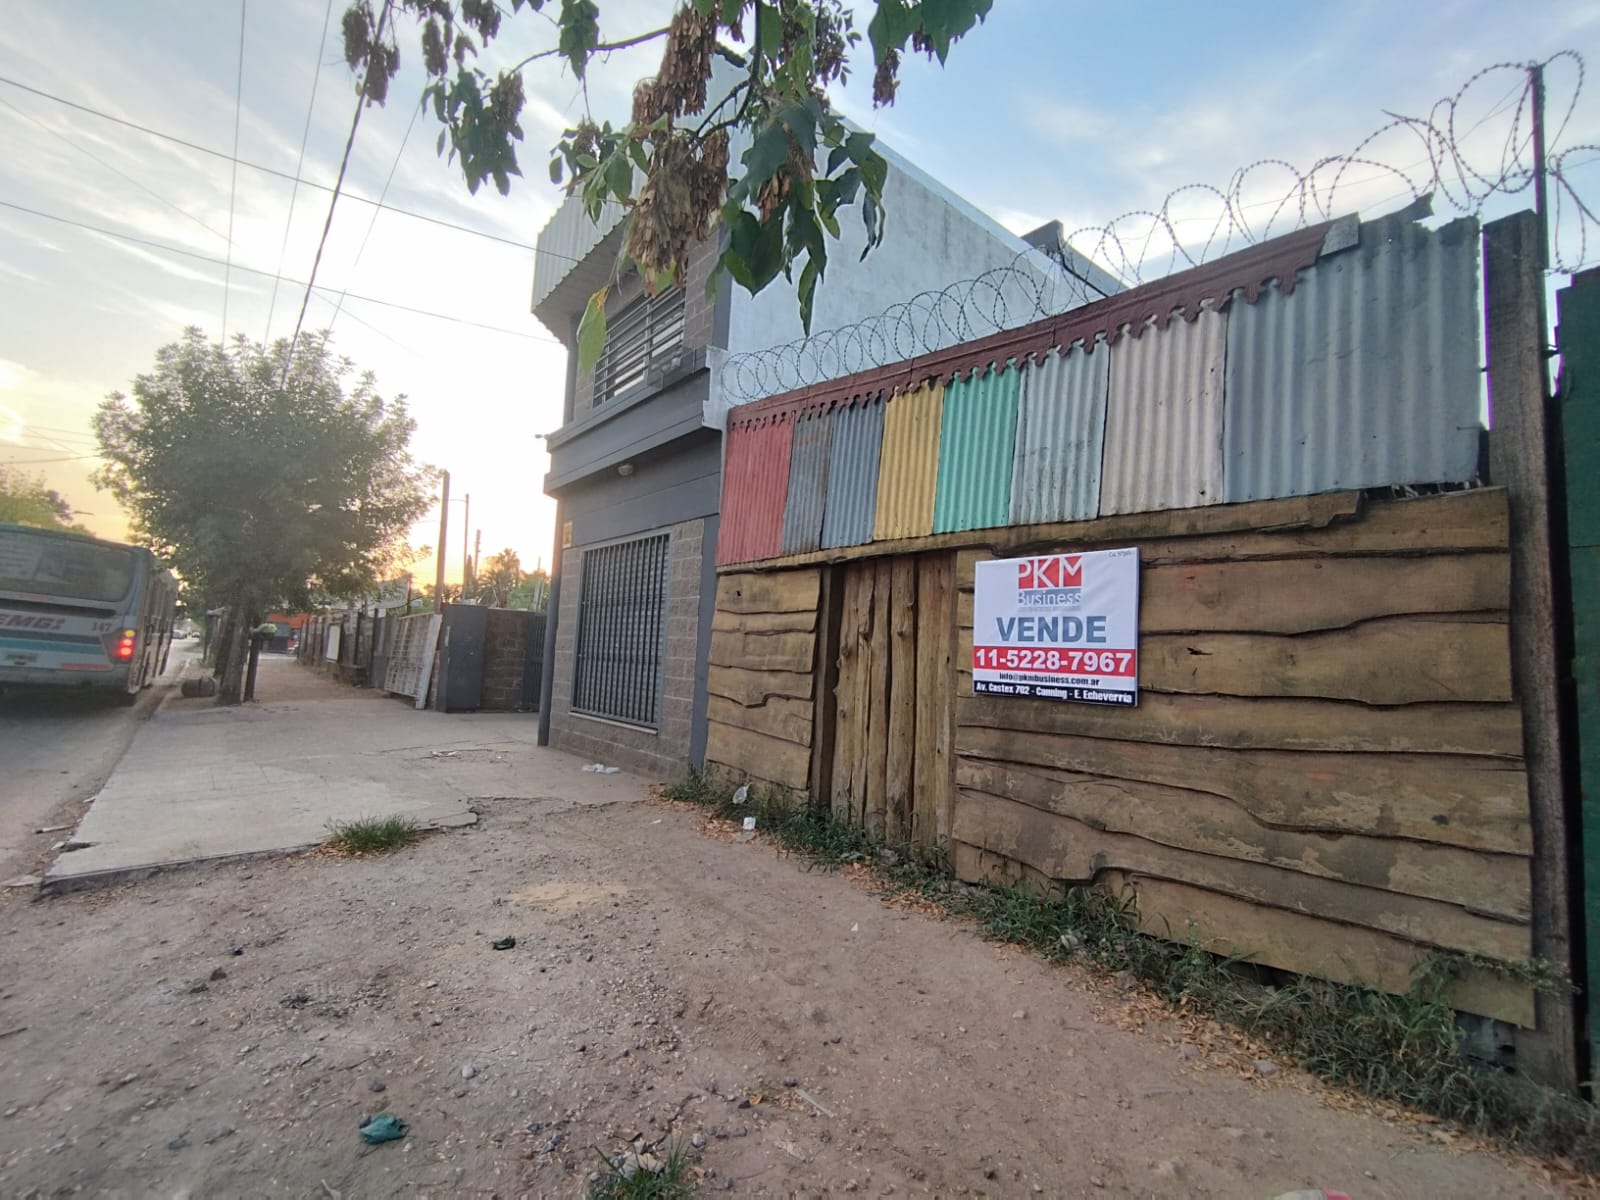 #3819371 | Venta | Lote | Canning (PKM Business)